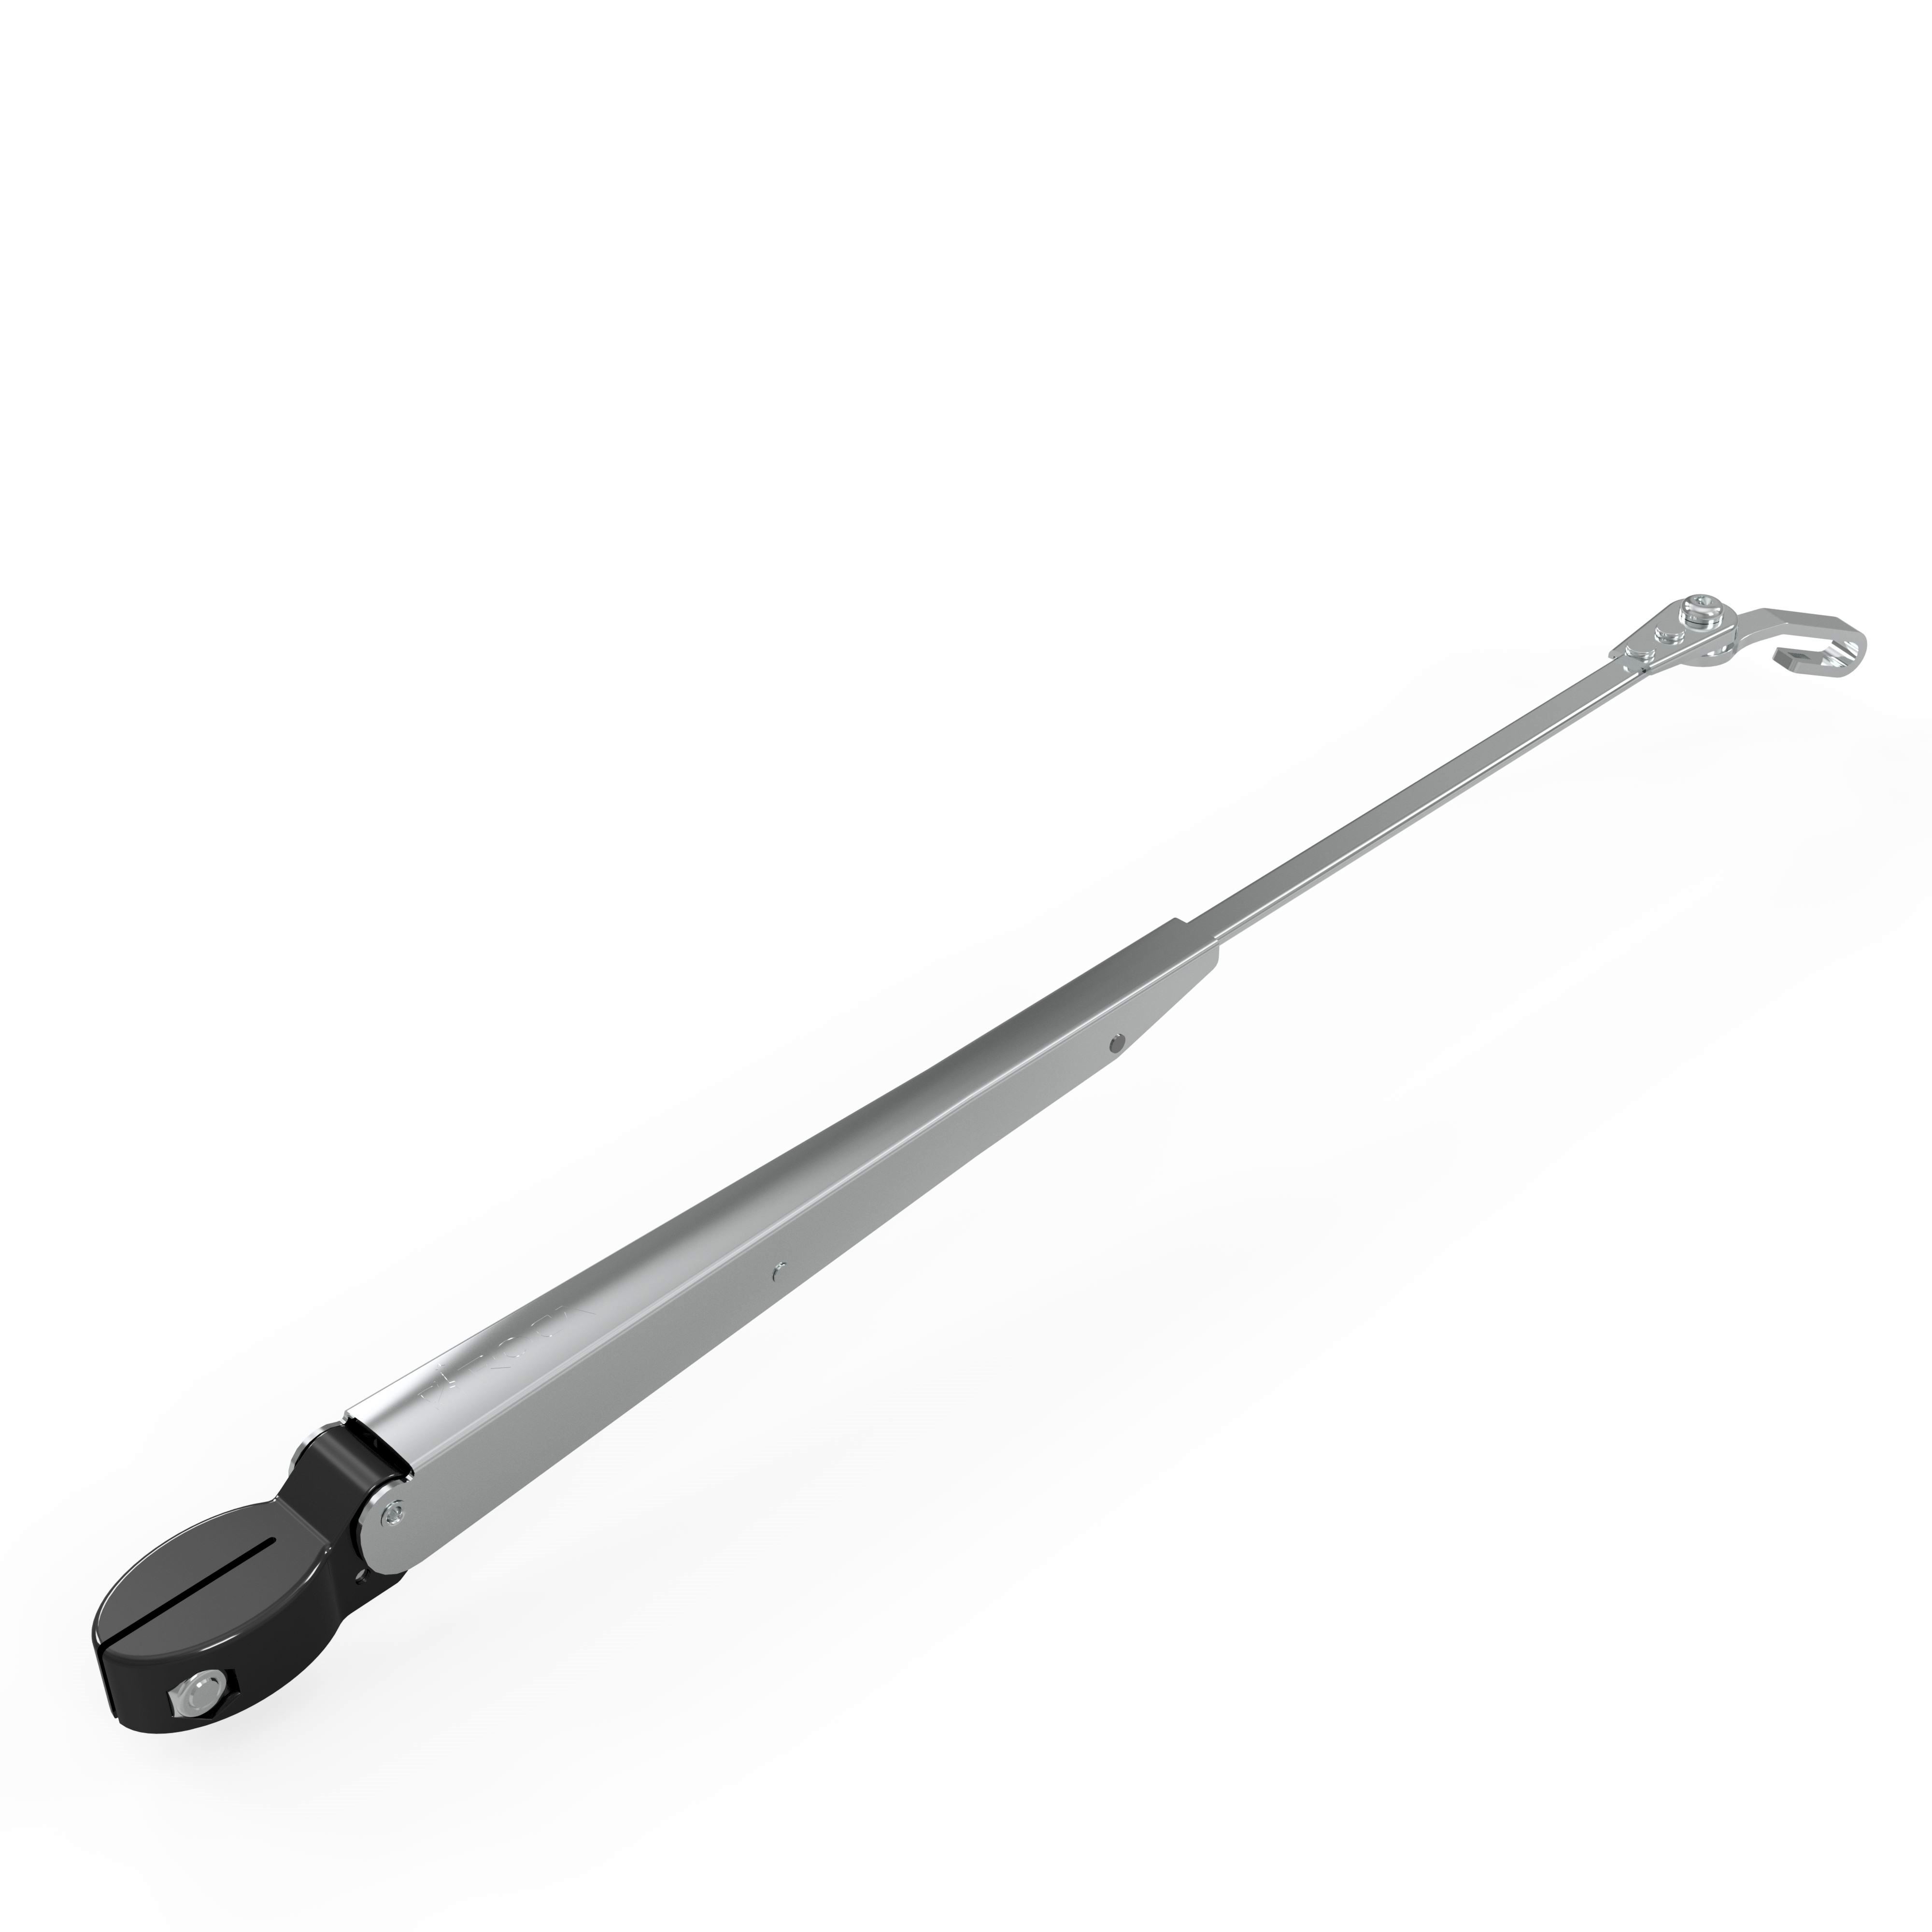 Wiper arm with adjustable tip - 2